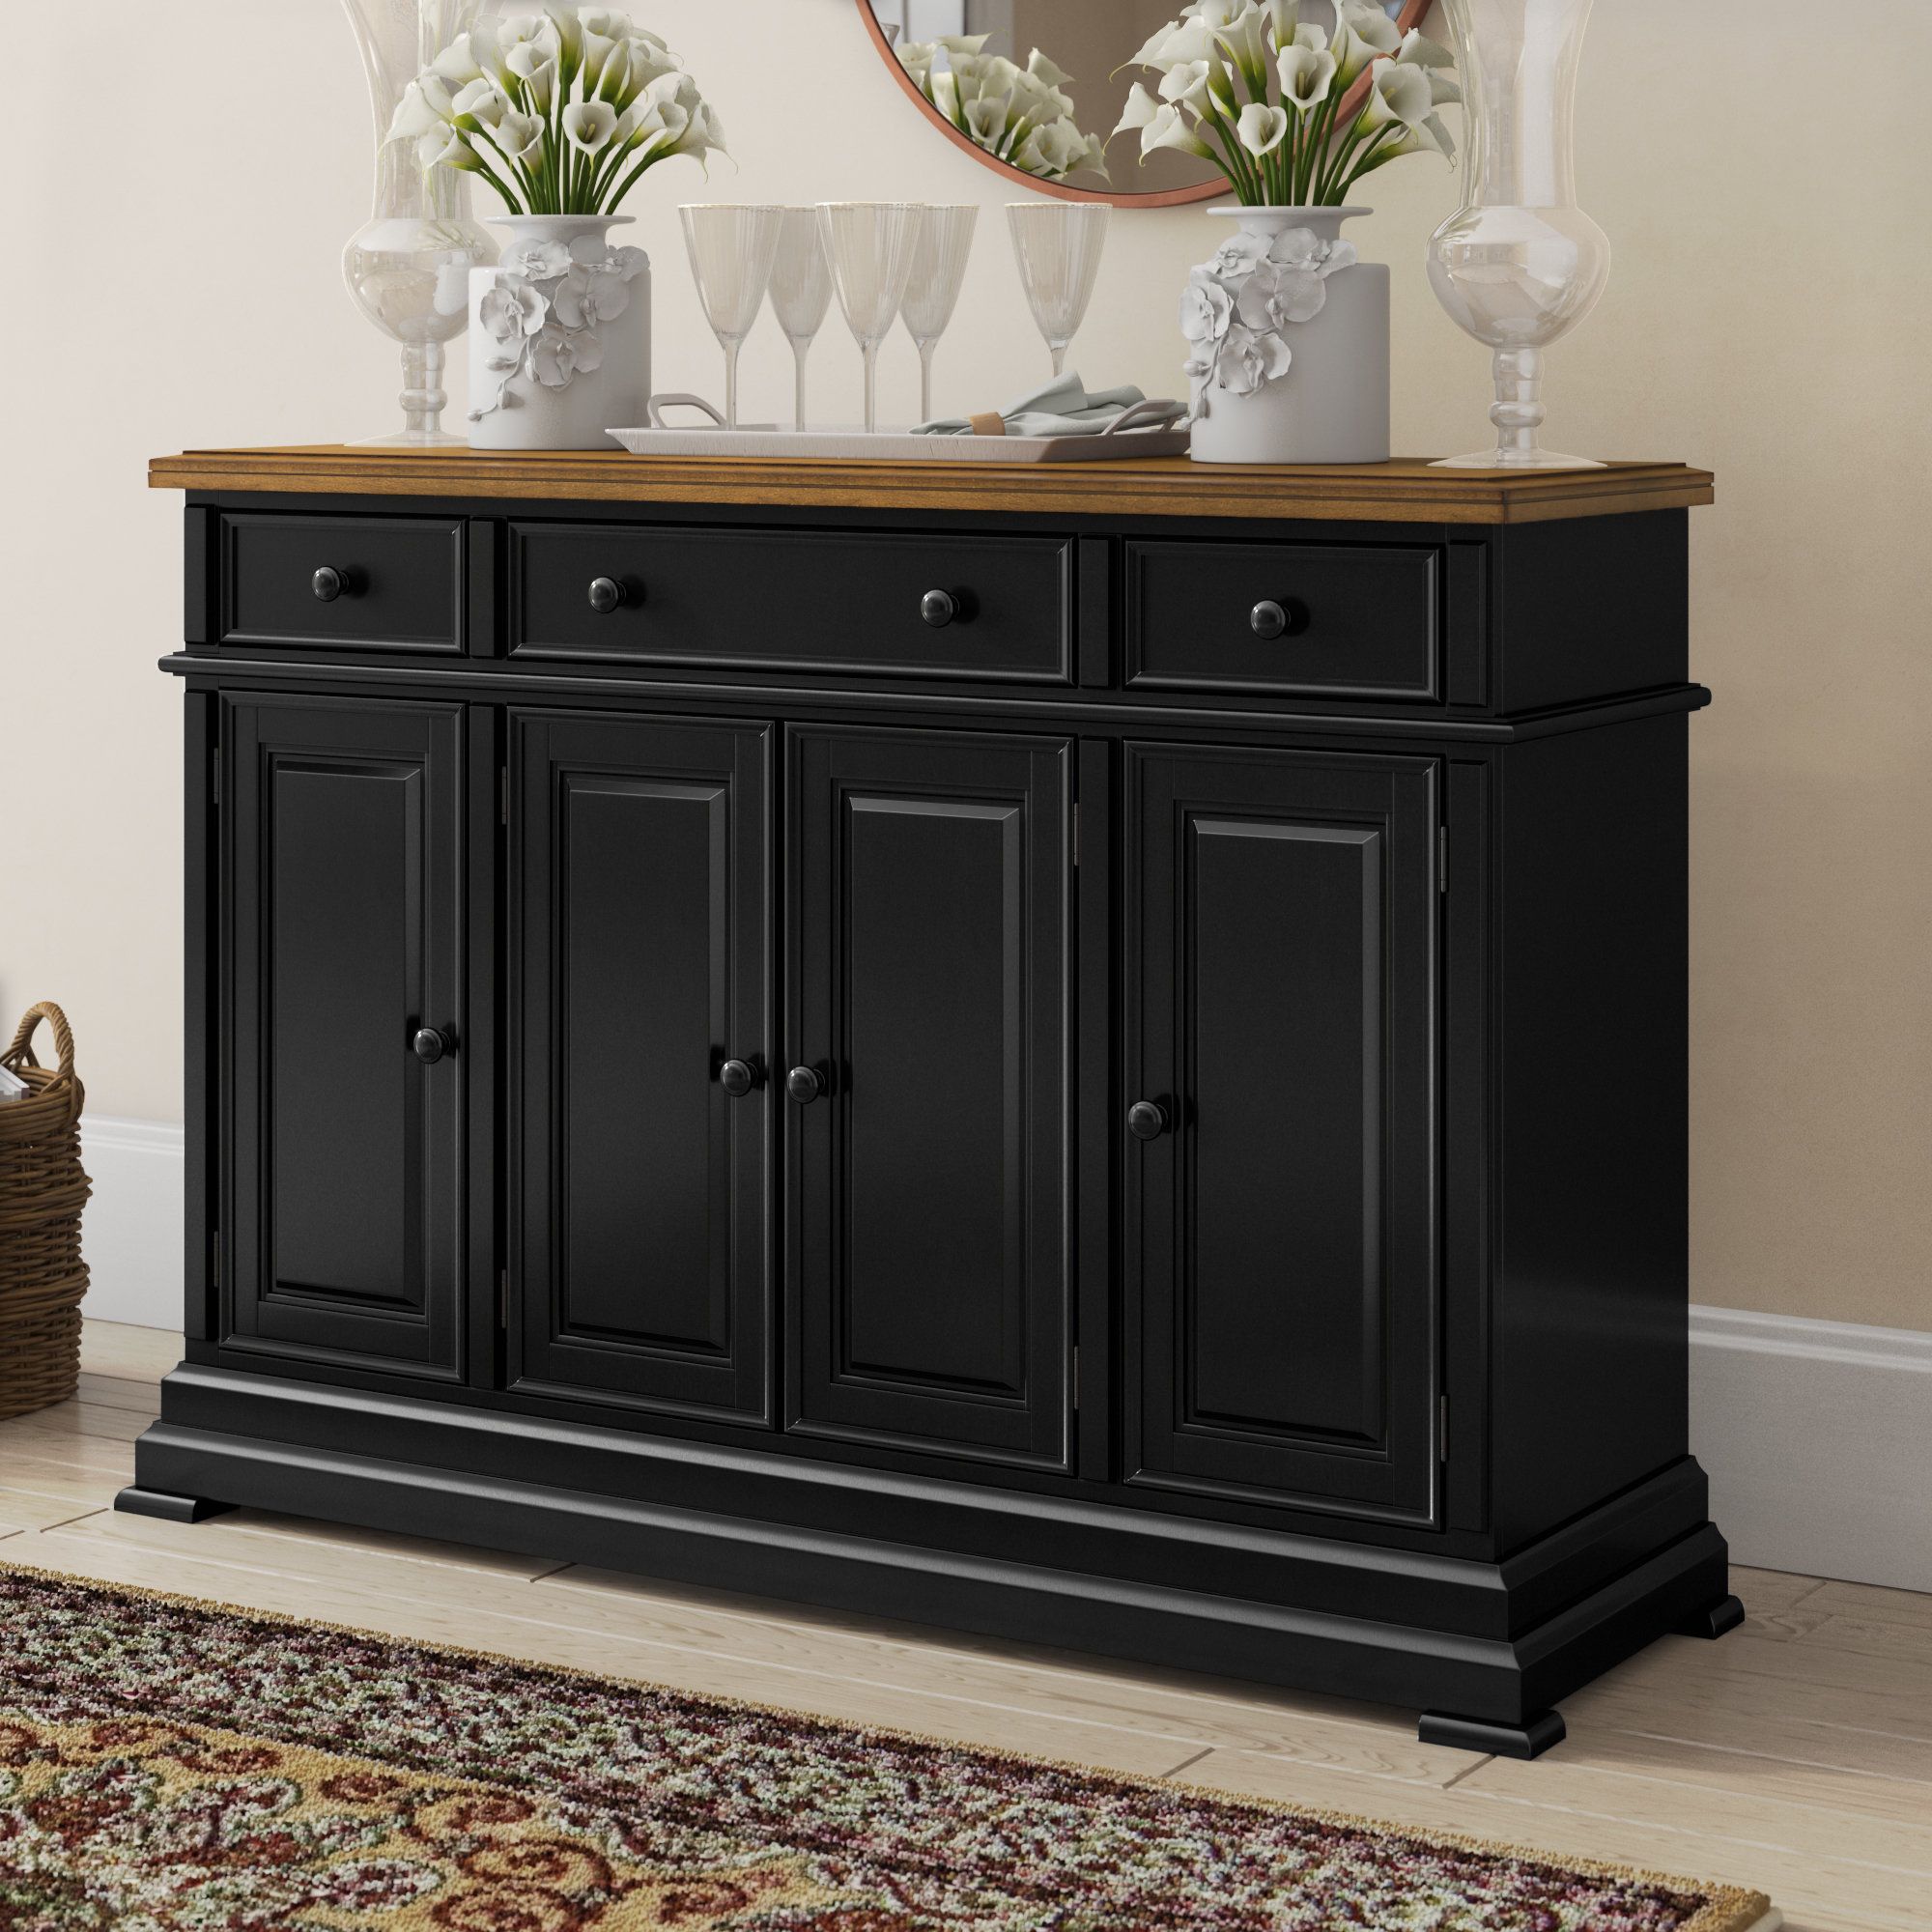 Three Posts Courtdale Sideboard | Wayfair With Regard To Courtdale Sideboards (View 2 of 20)